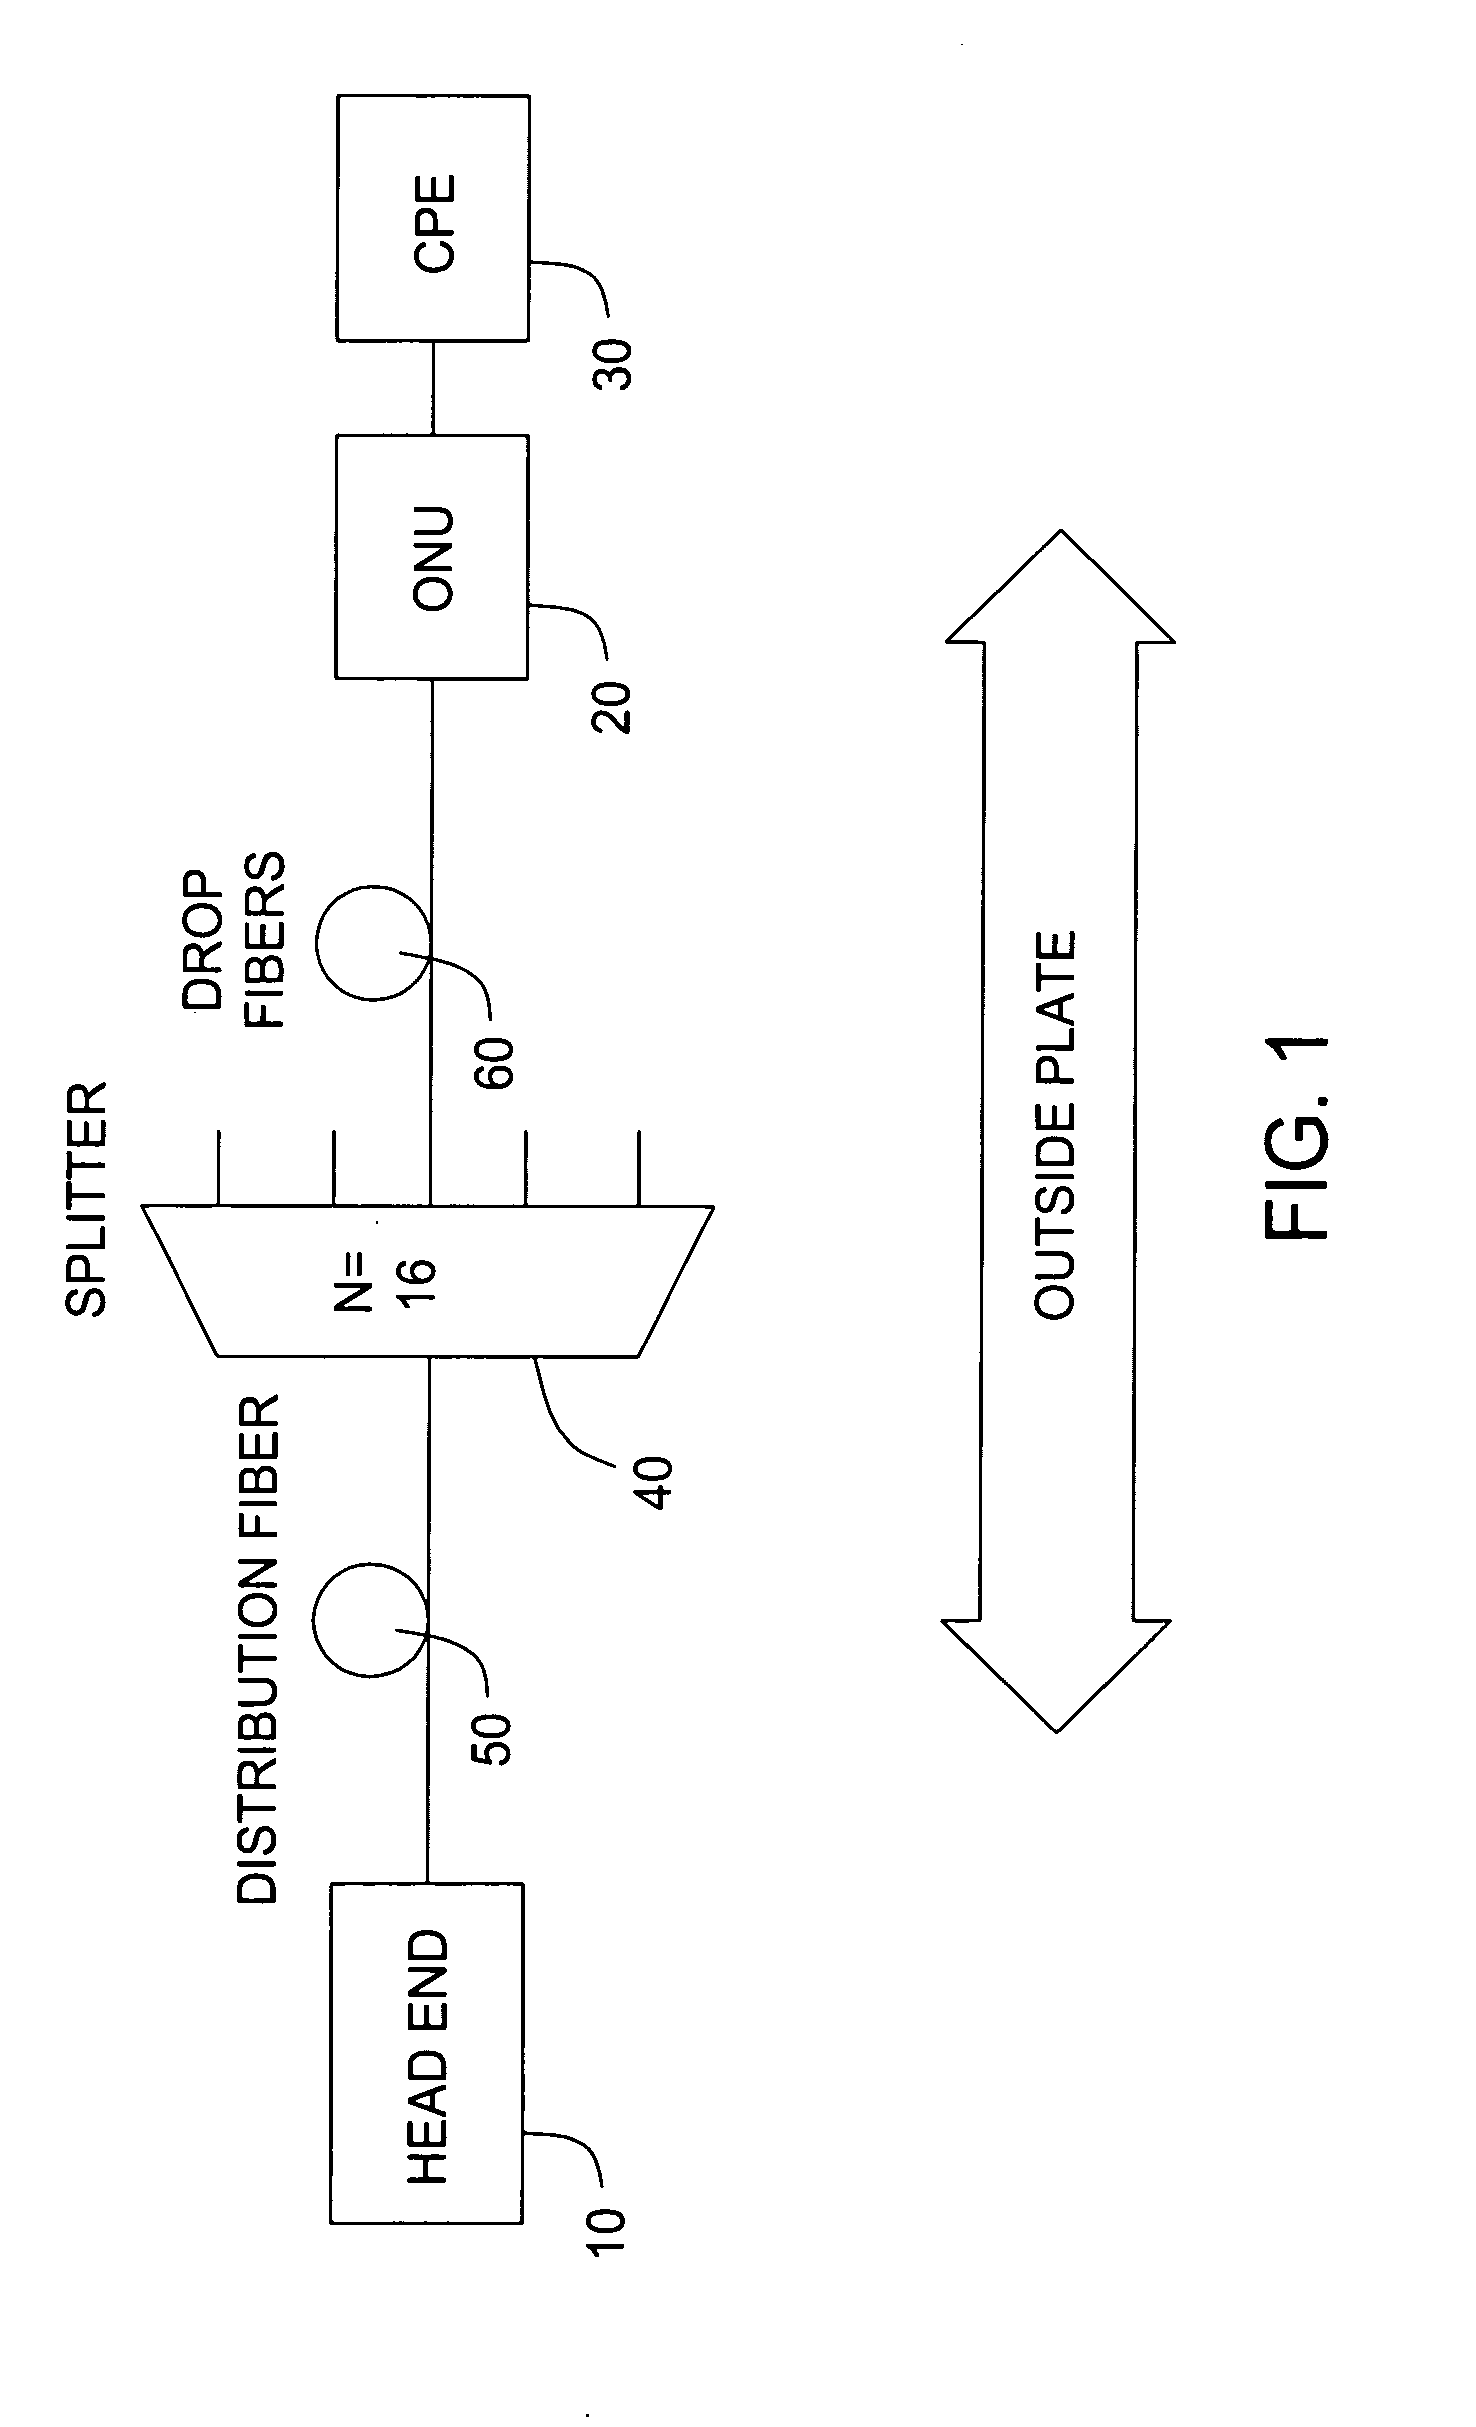 System for operating an Ethernet data network over a passive optical network access system